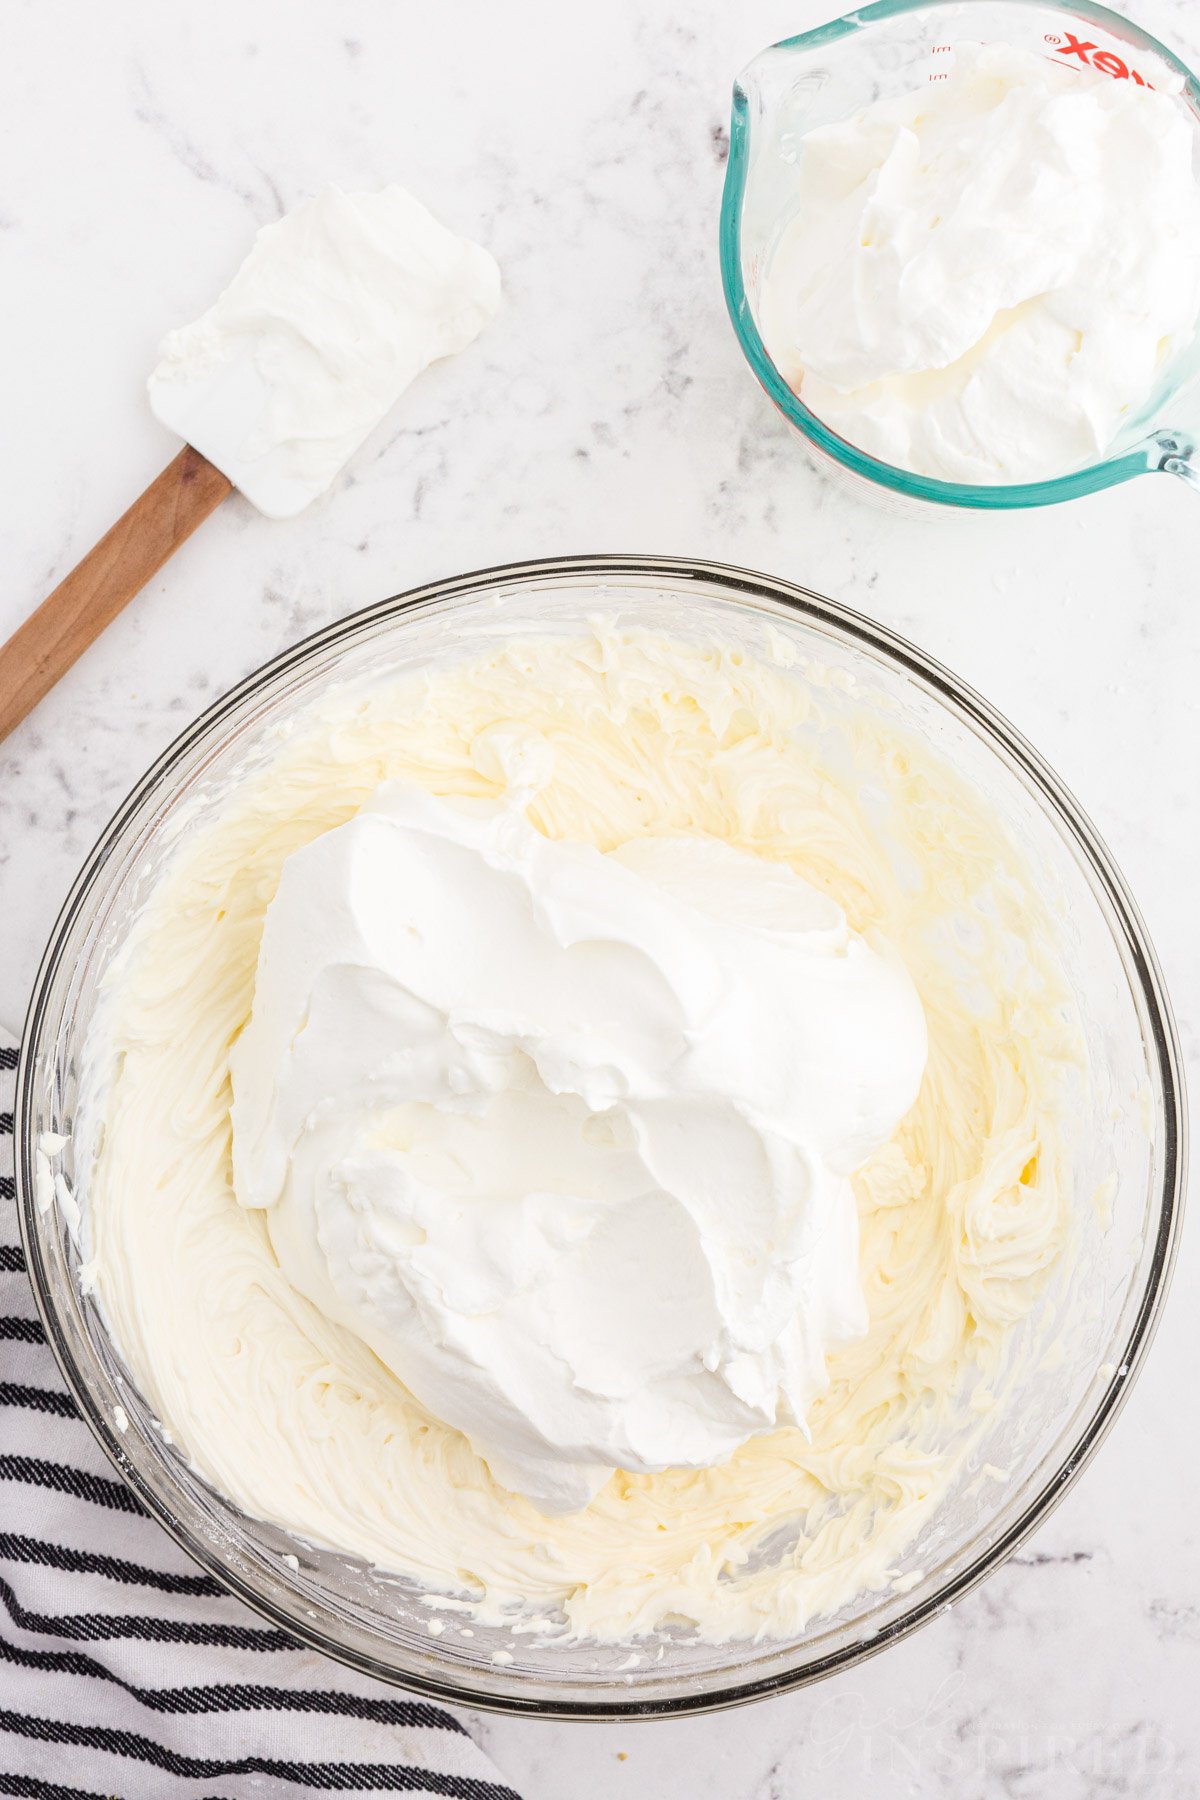 Whipped cream added to bowl of cream cheese mixture, striped linen, bowl of whipped cream, rubber spatula, on a white marble surface.